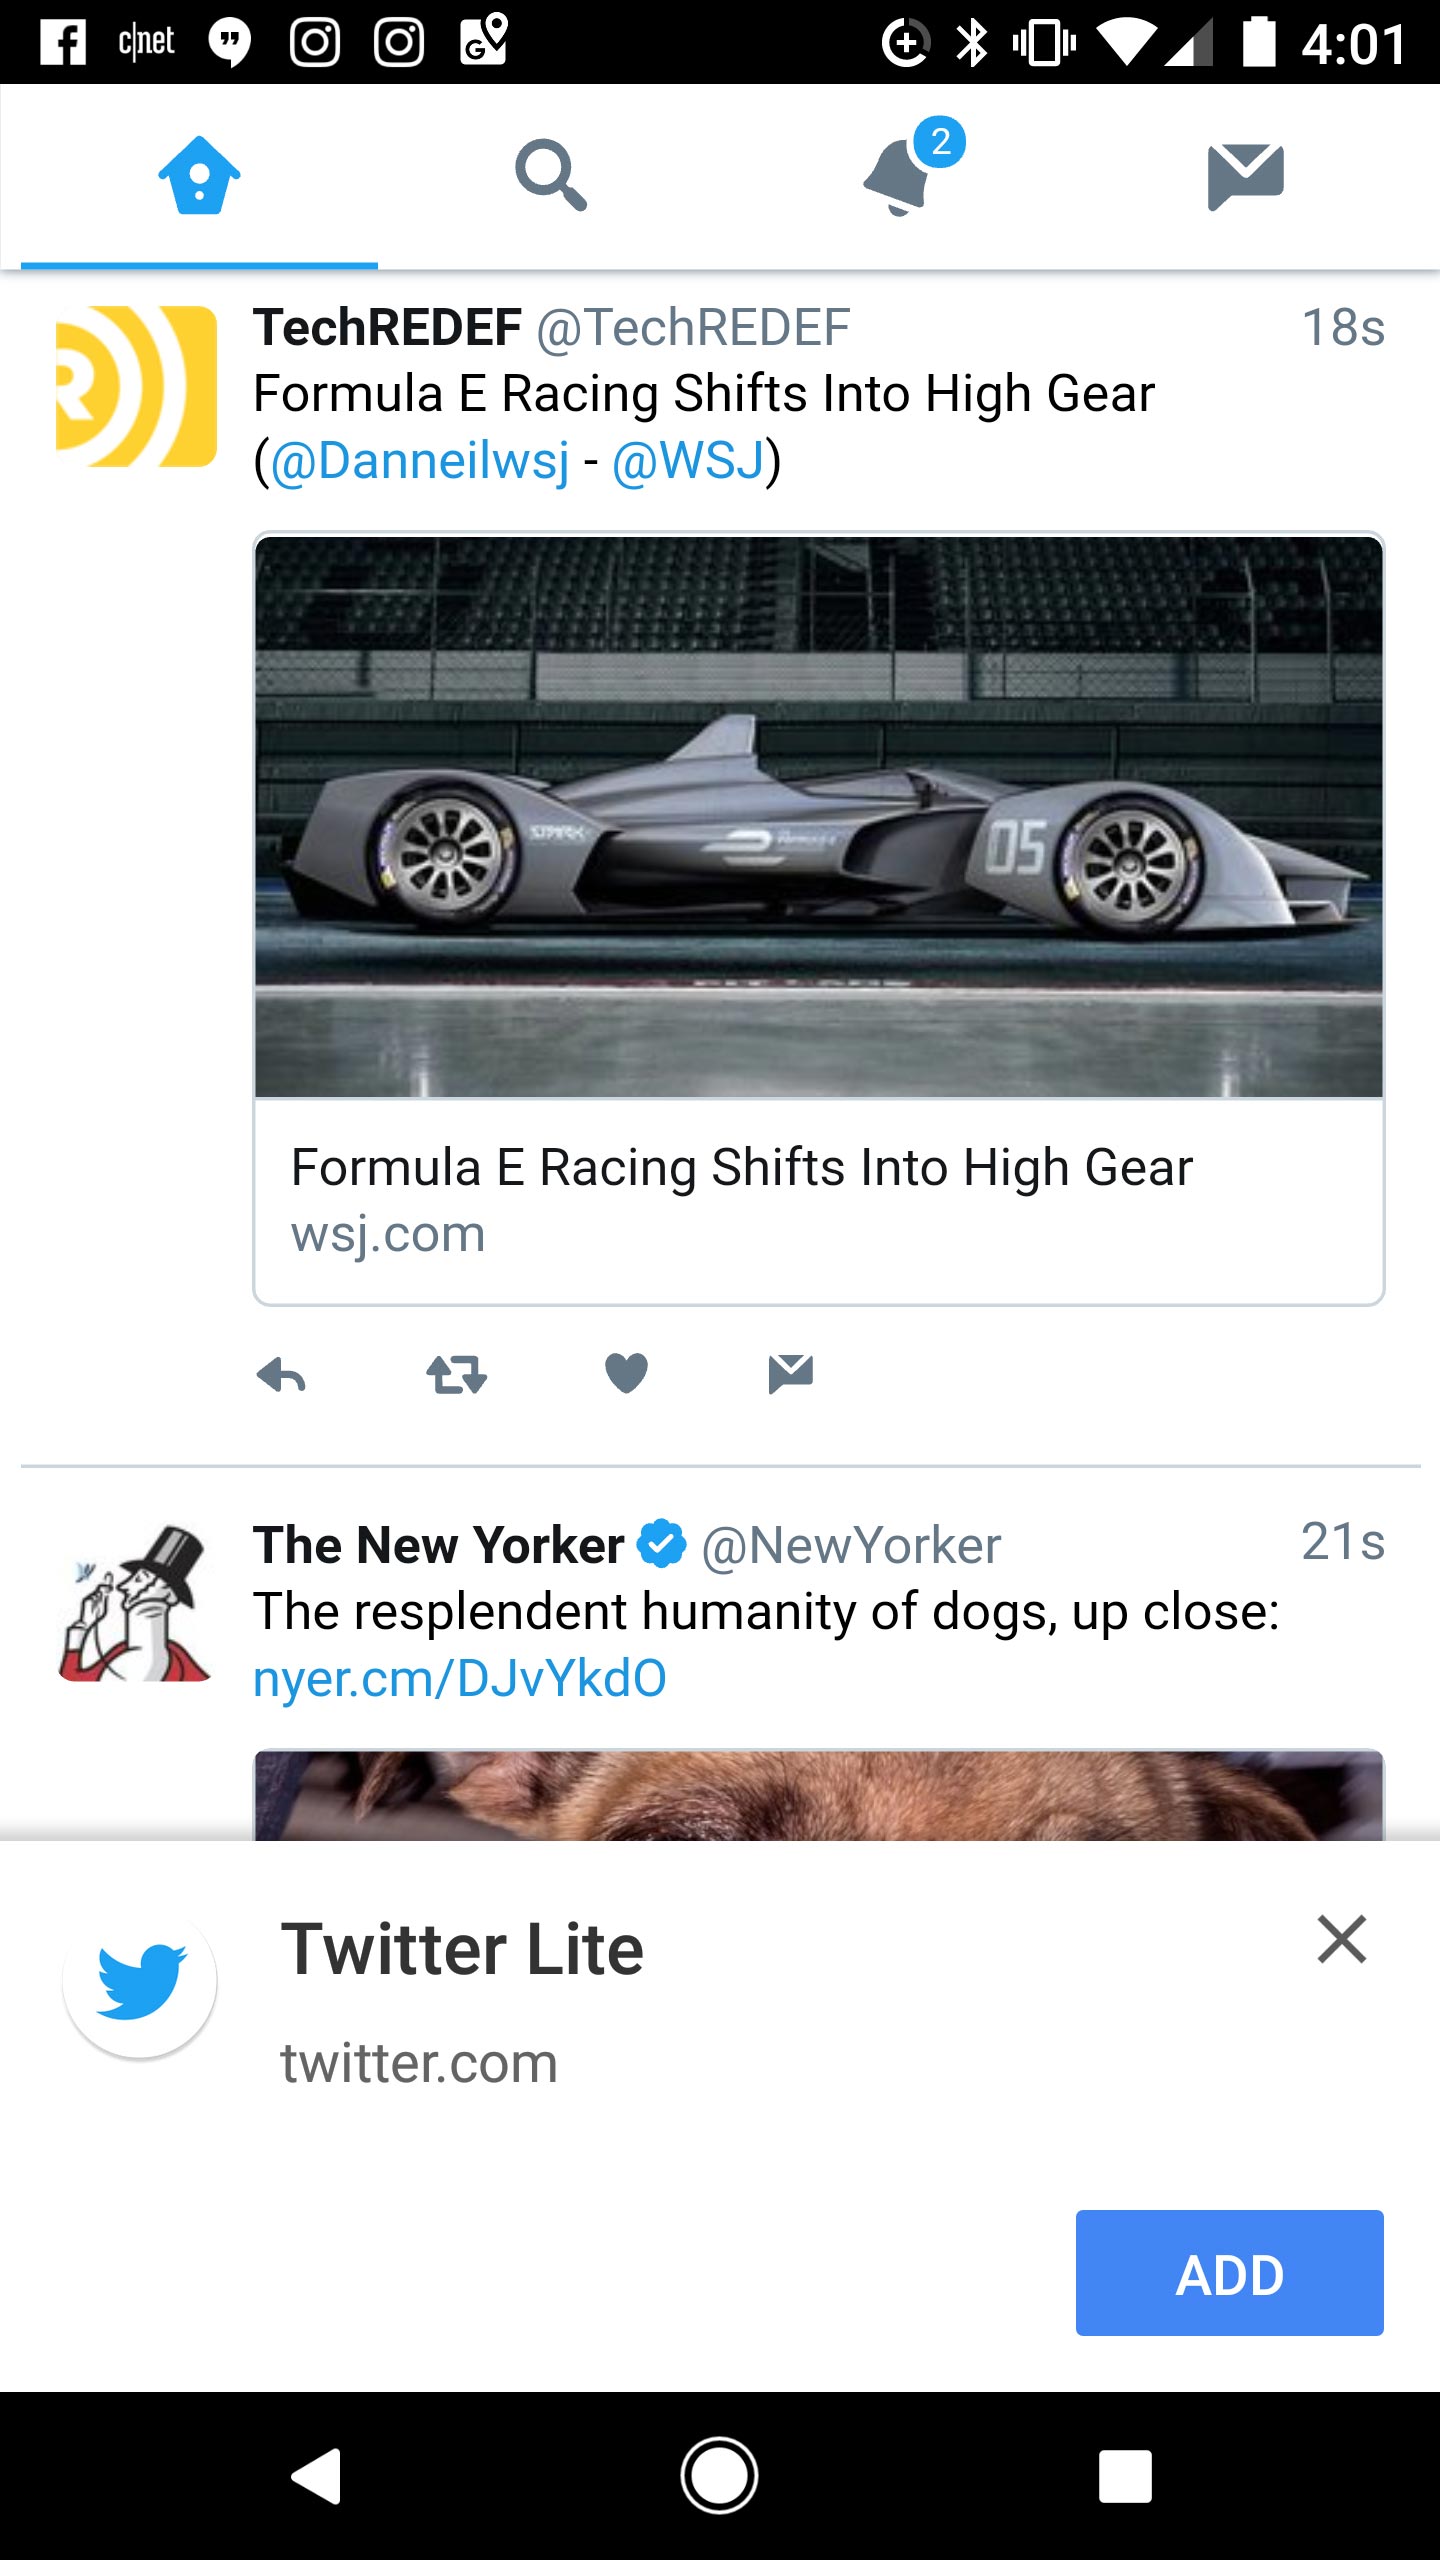 ​Twitter Lite looks similar to the native Twitter app. On Android, it asks if you want to add its icon to your home screen, a move that downloads components for a richer experience and faster launch times.